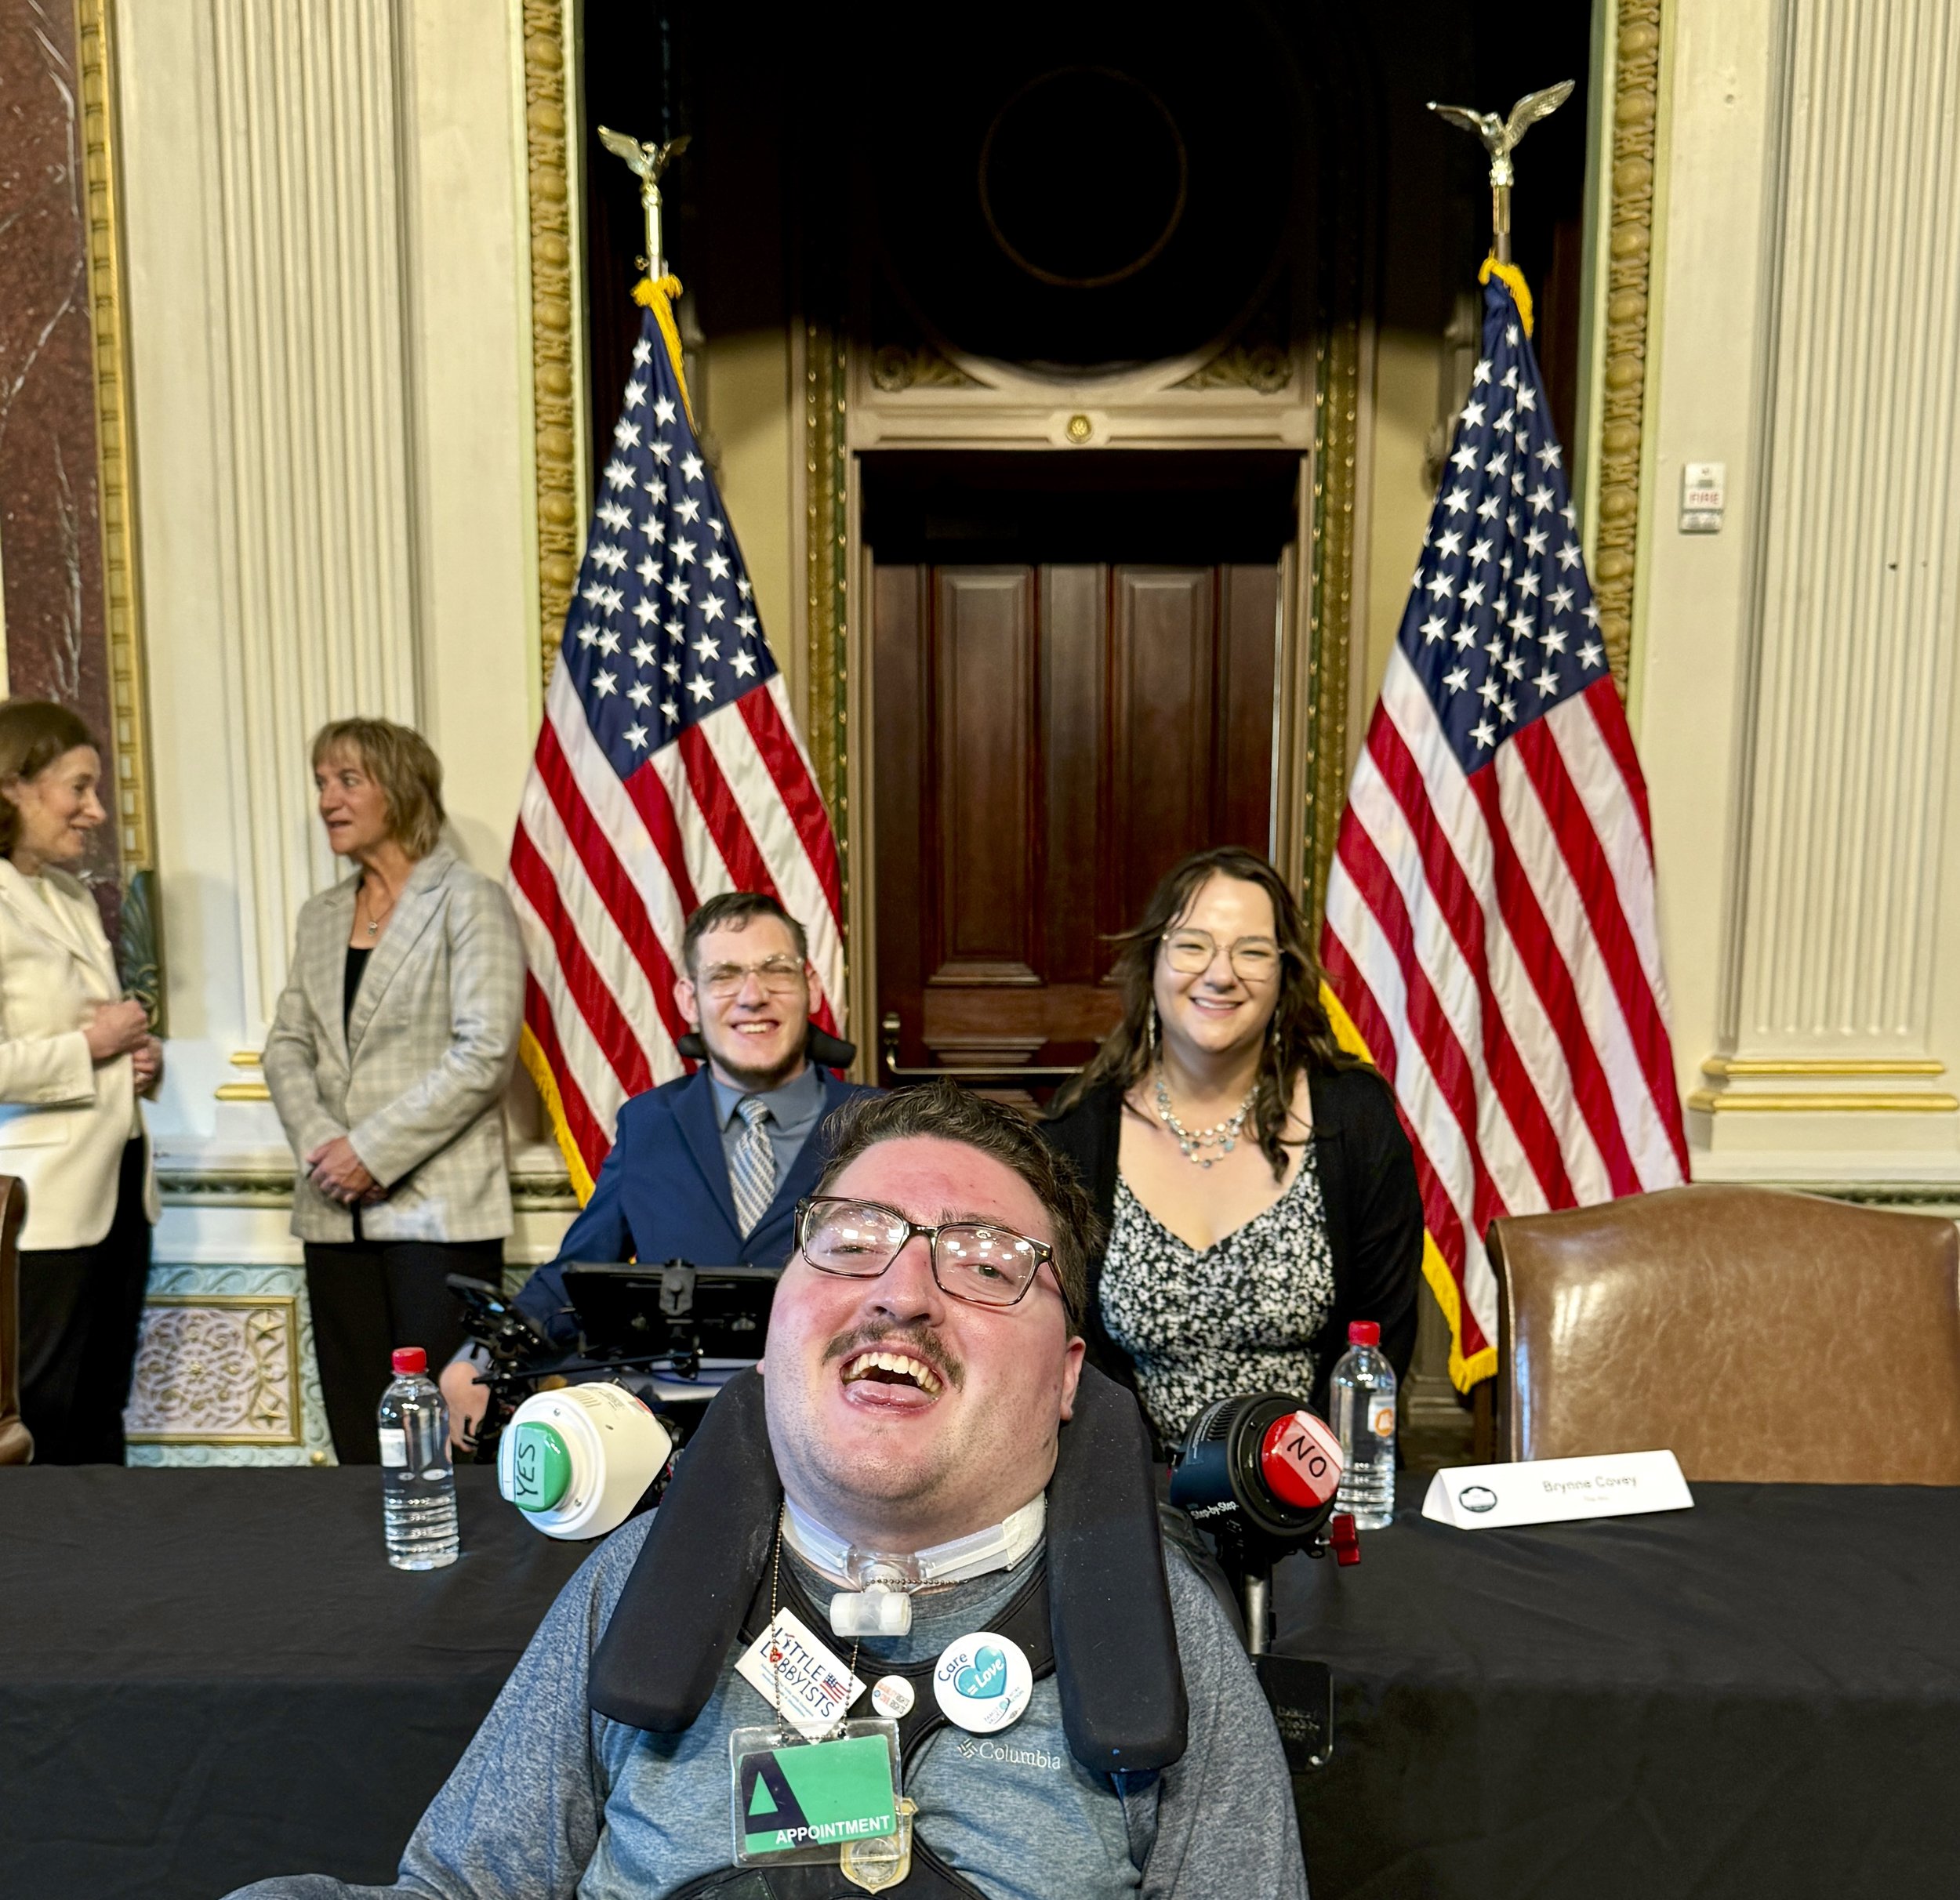  Rob poses in-between advocates Carson Covey (a fellow wheelchair- and AAC-user) and Carson’s sister Brynne. Behind them are two American flags flanking a decorative bronze doorway. 